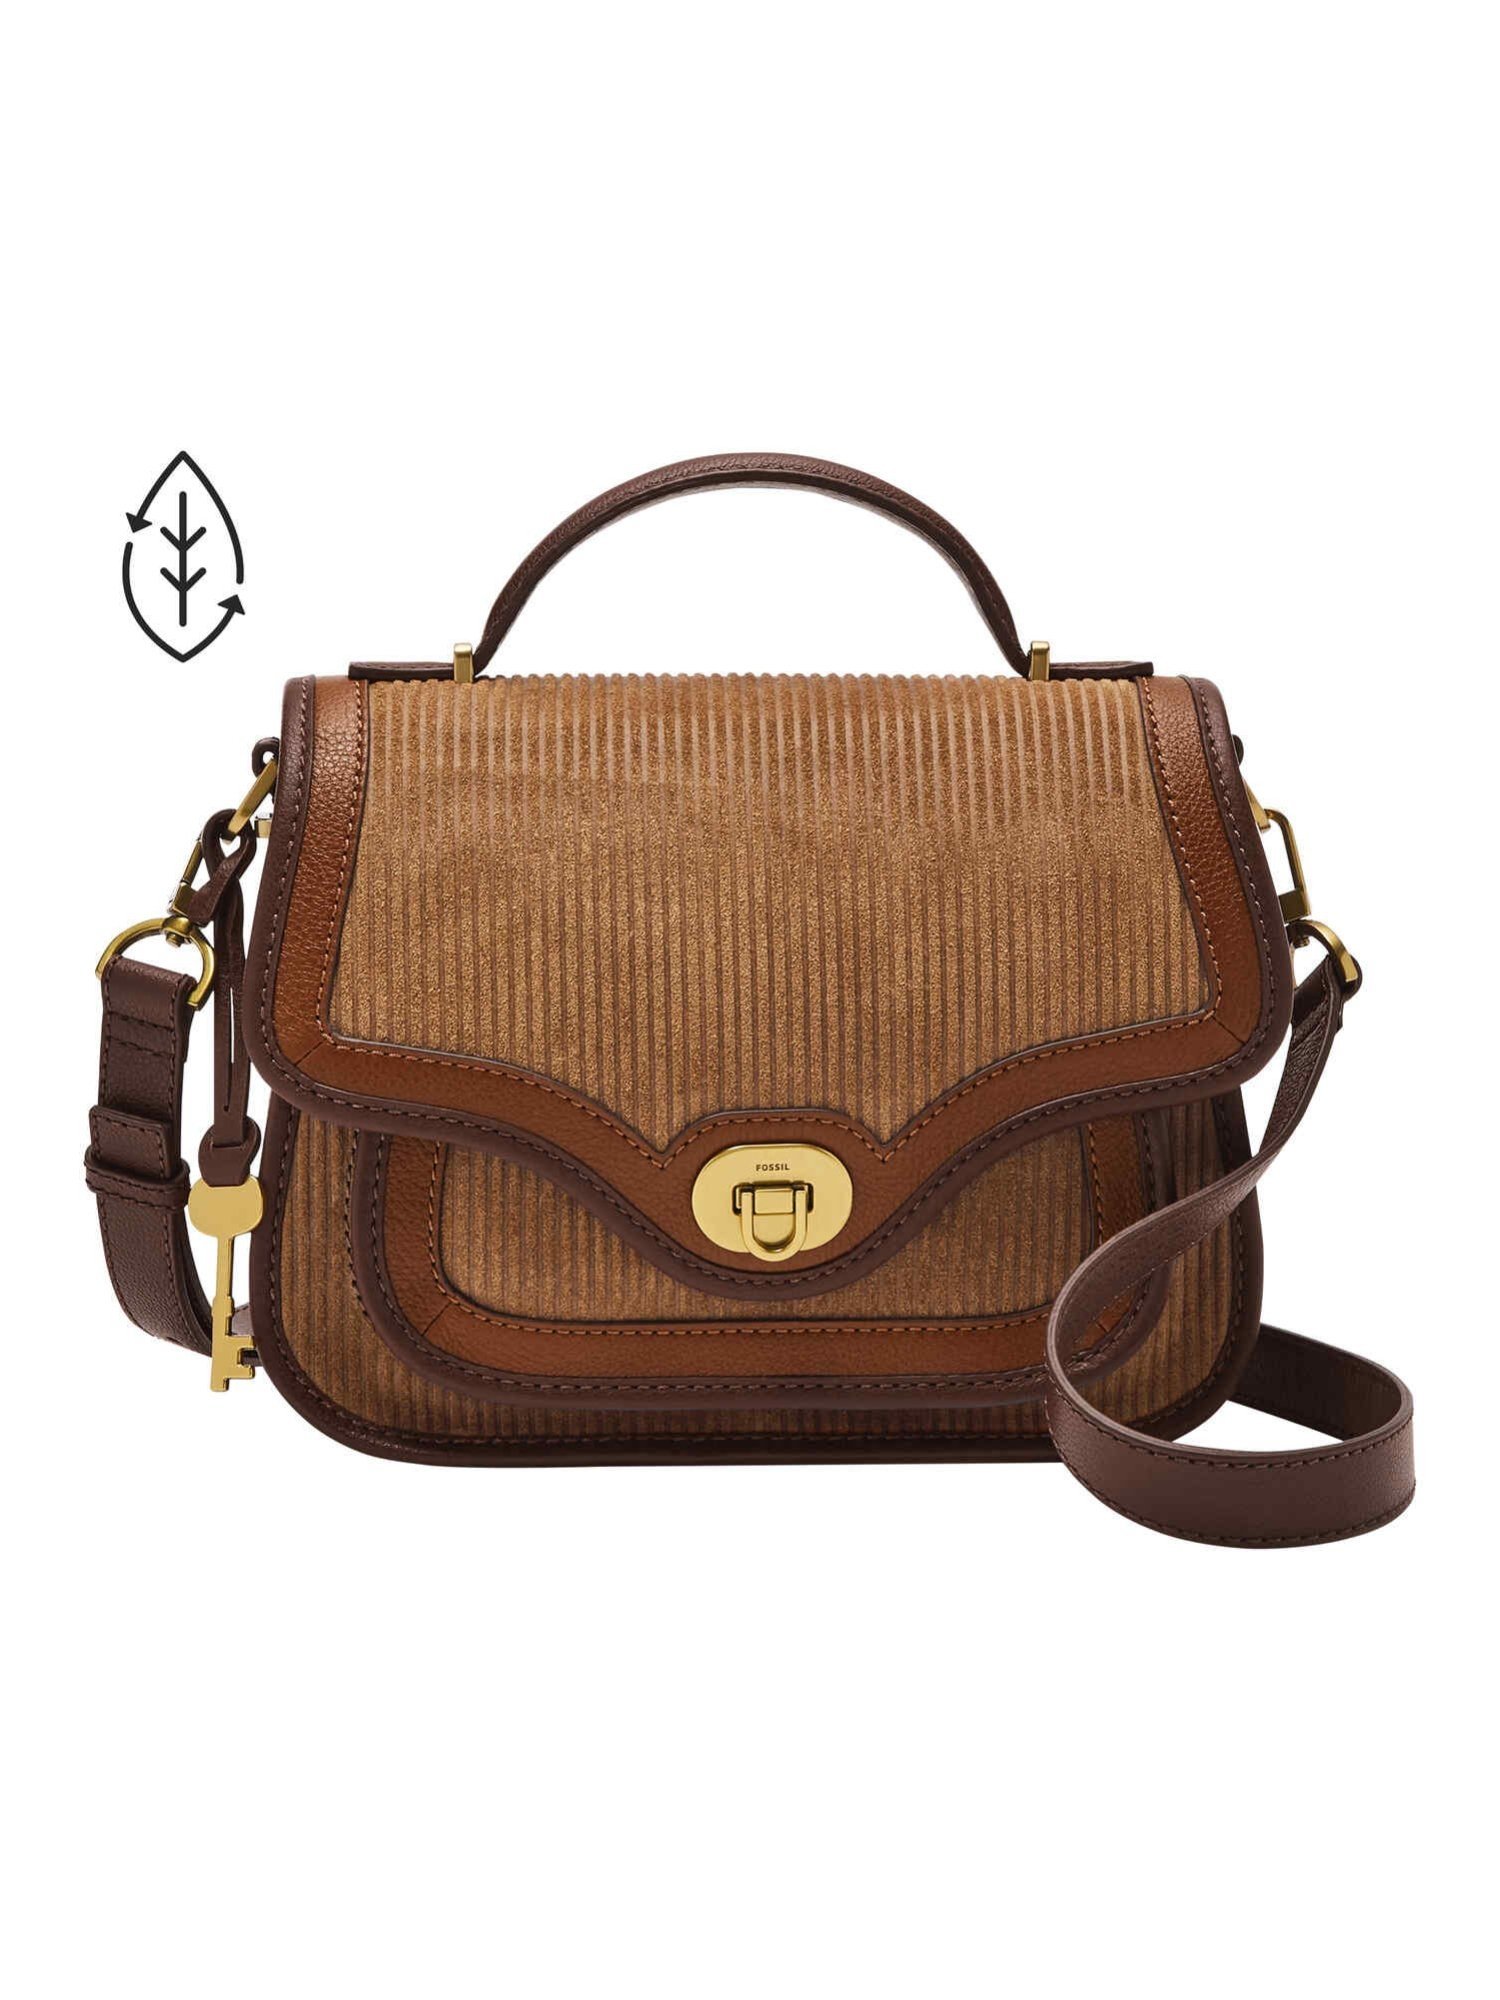 【SALE／50 OFF】FOSSIL FOSSIL/(W)FOSSIL HERITAGE CROSS BODY ZB1816249 フォッシル バッグ ボディバッグ ウエストポーチ ブラウン【送料無料】